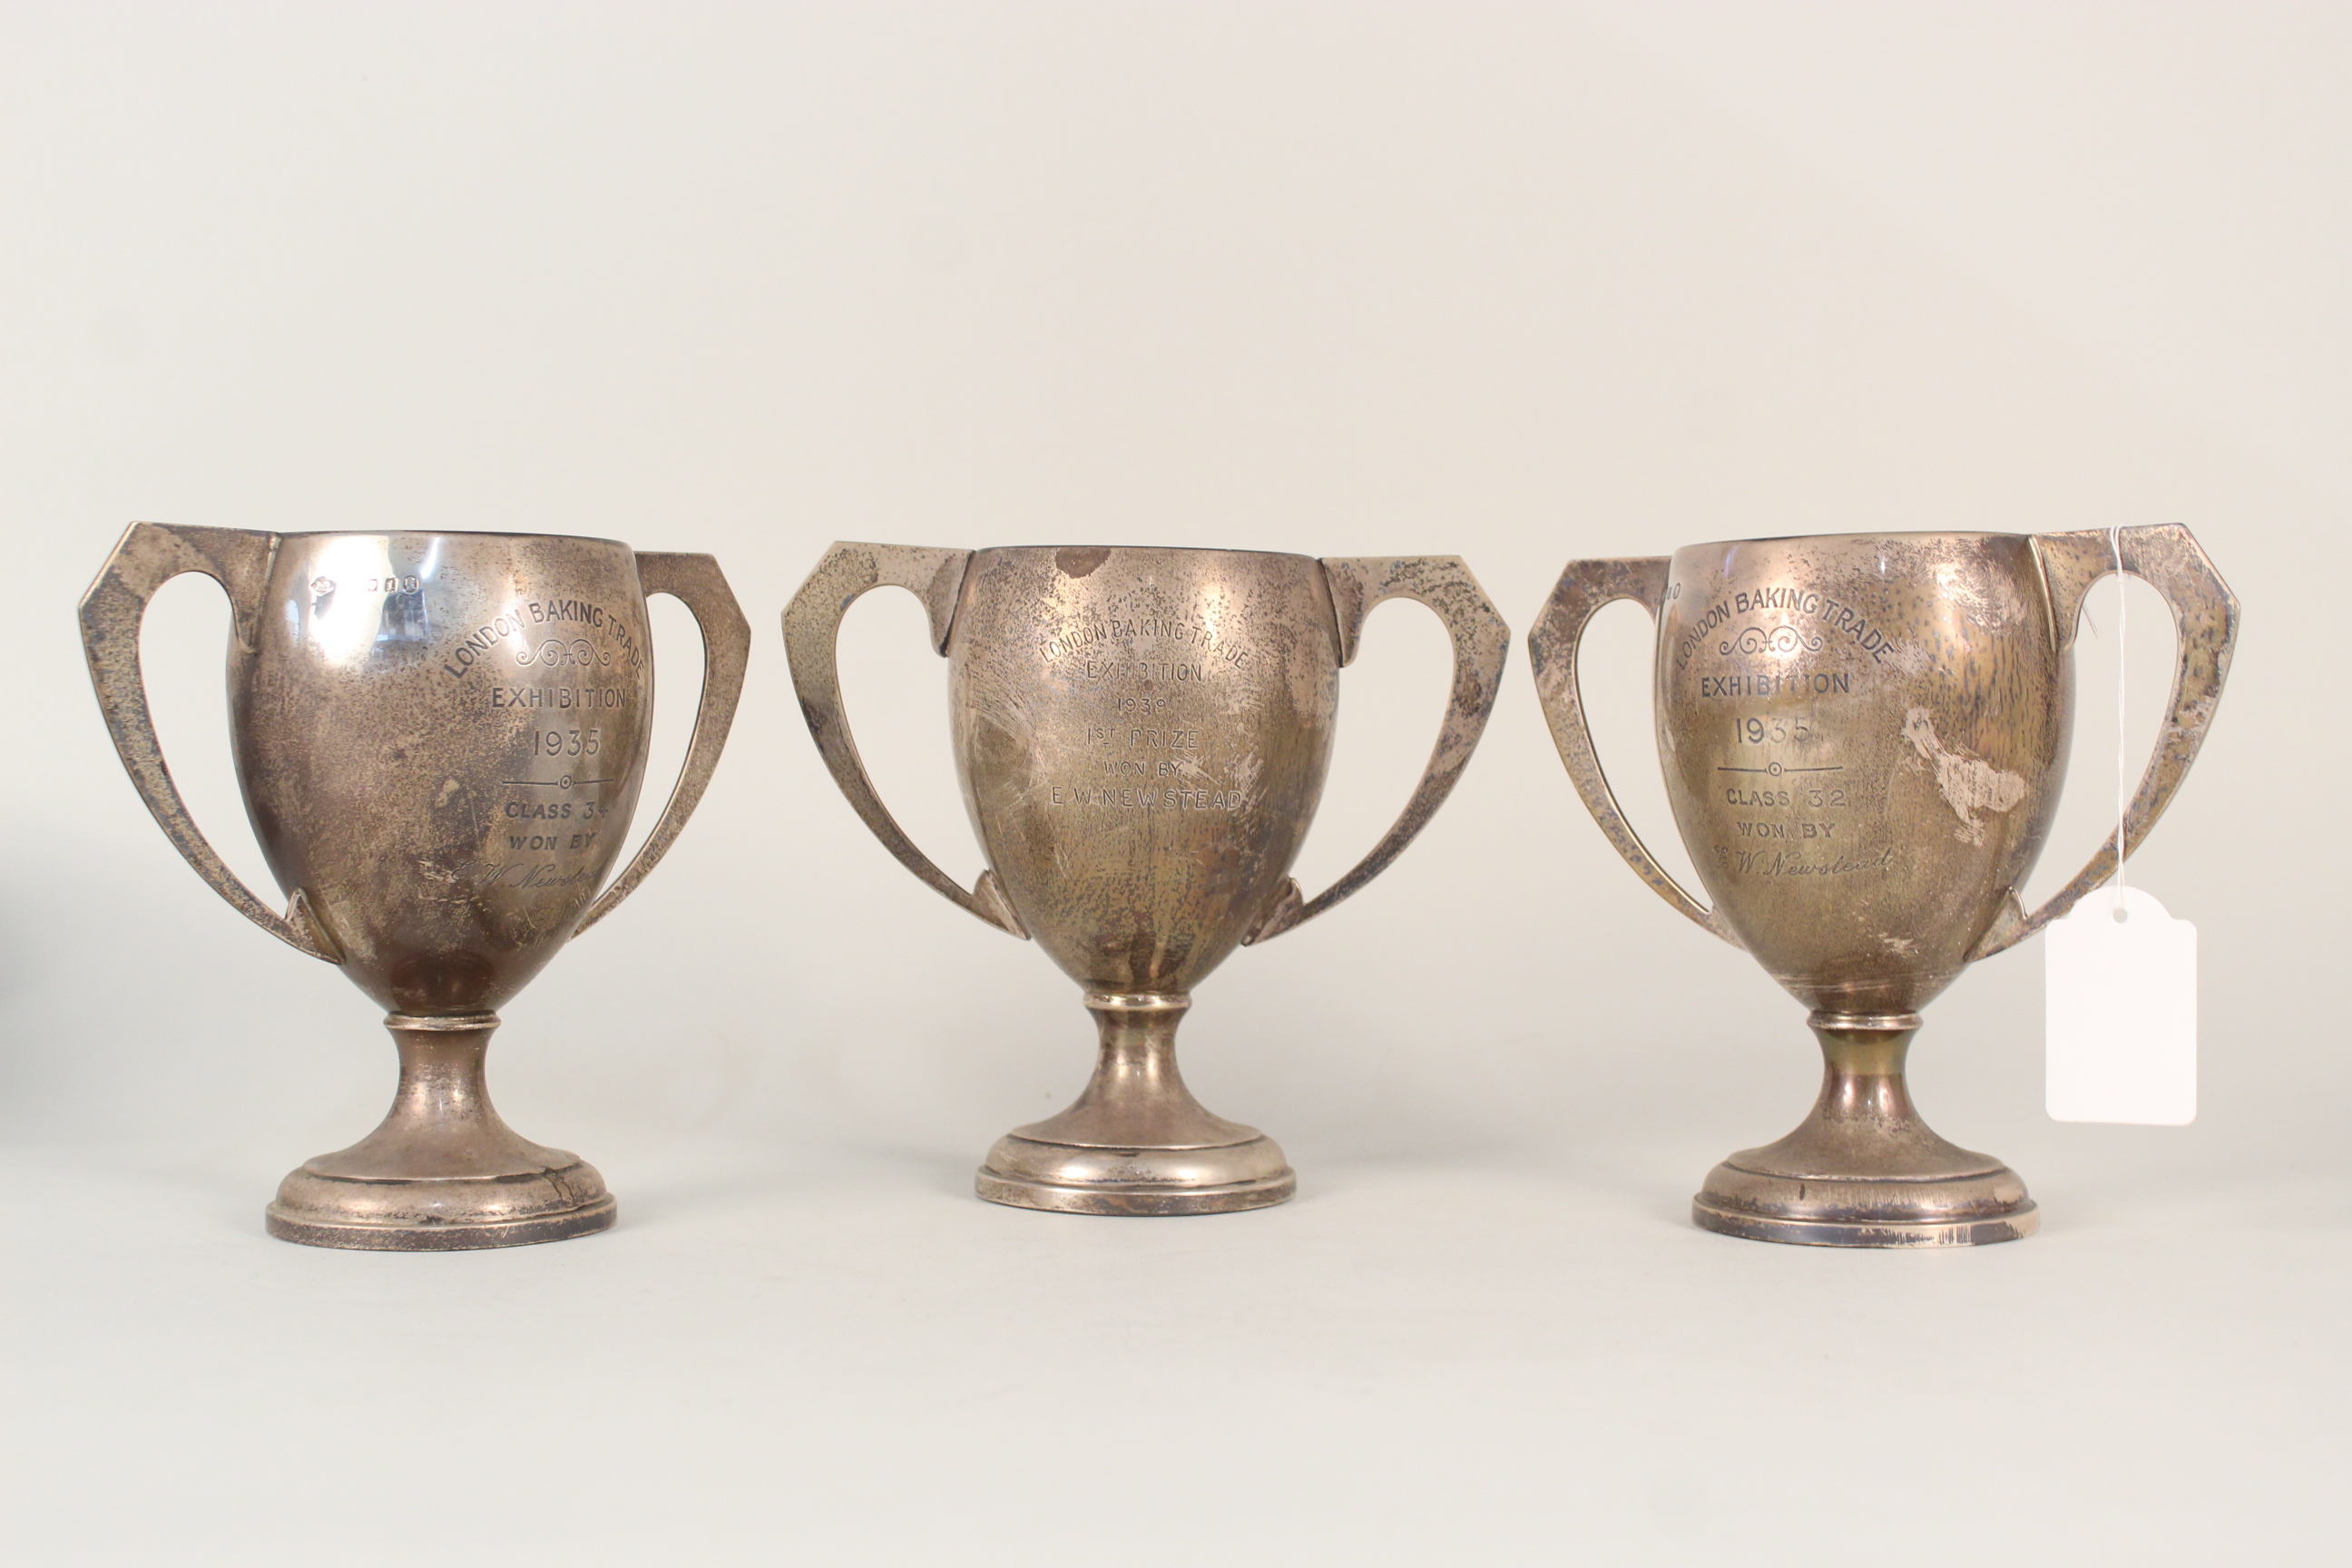 Three silver trophy cups, all with presentation inscriptions,